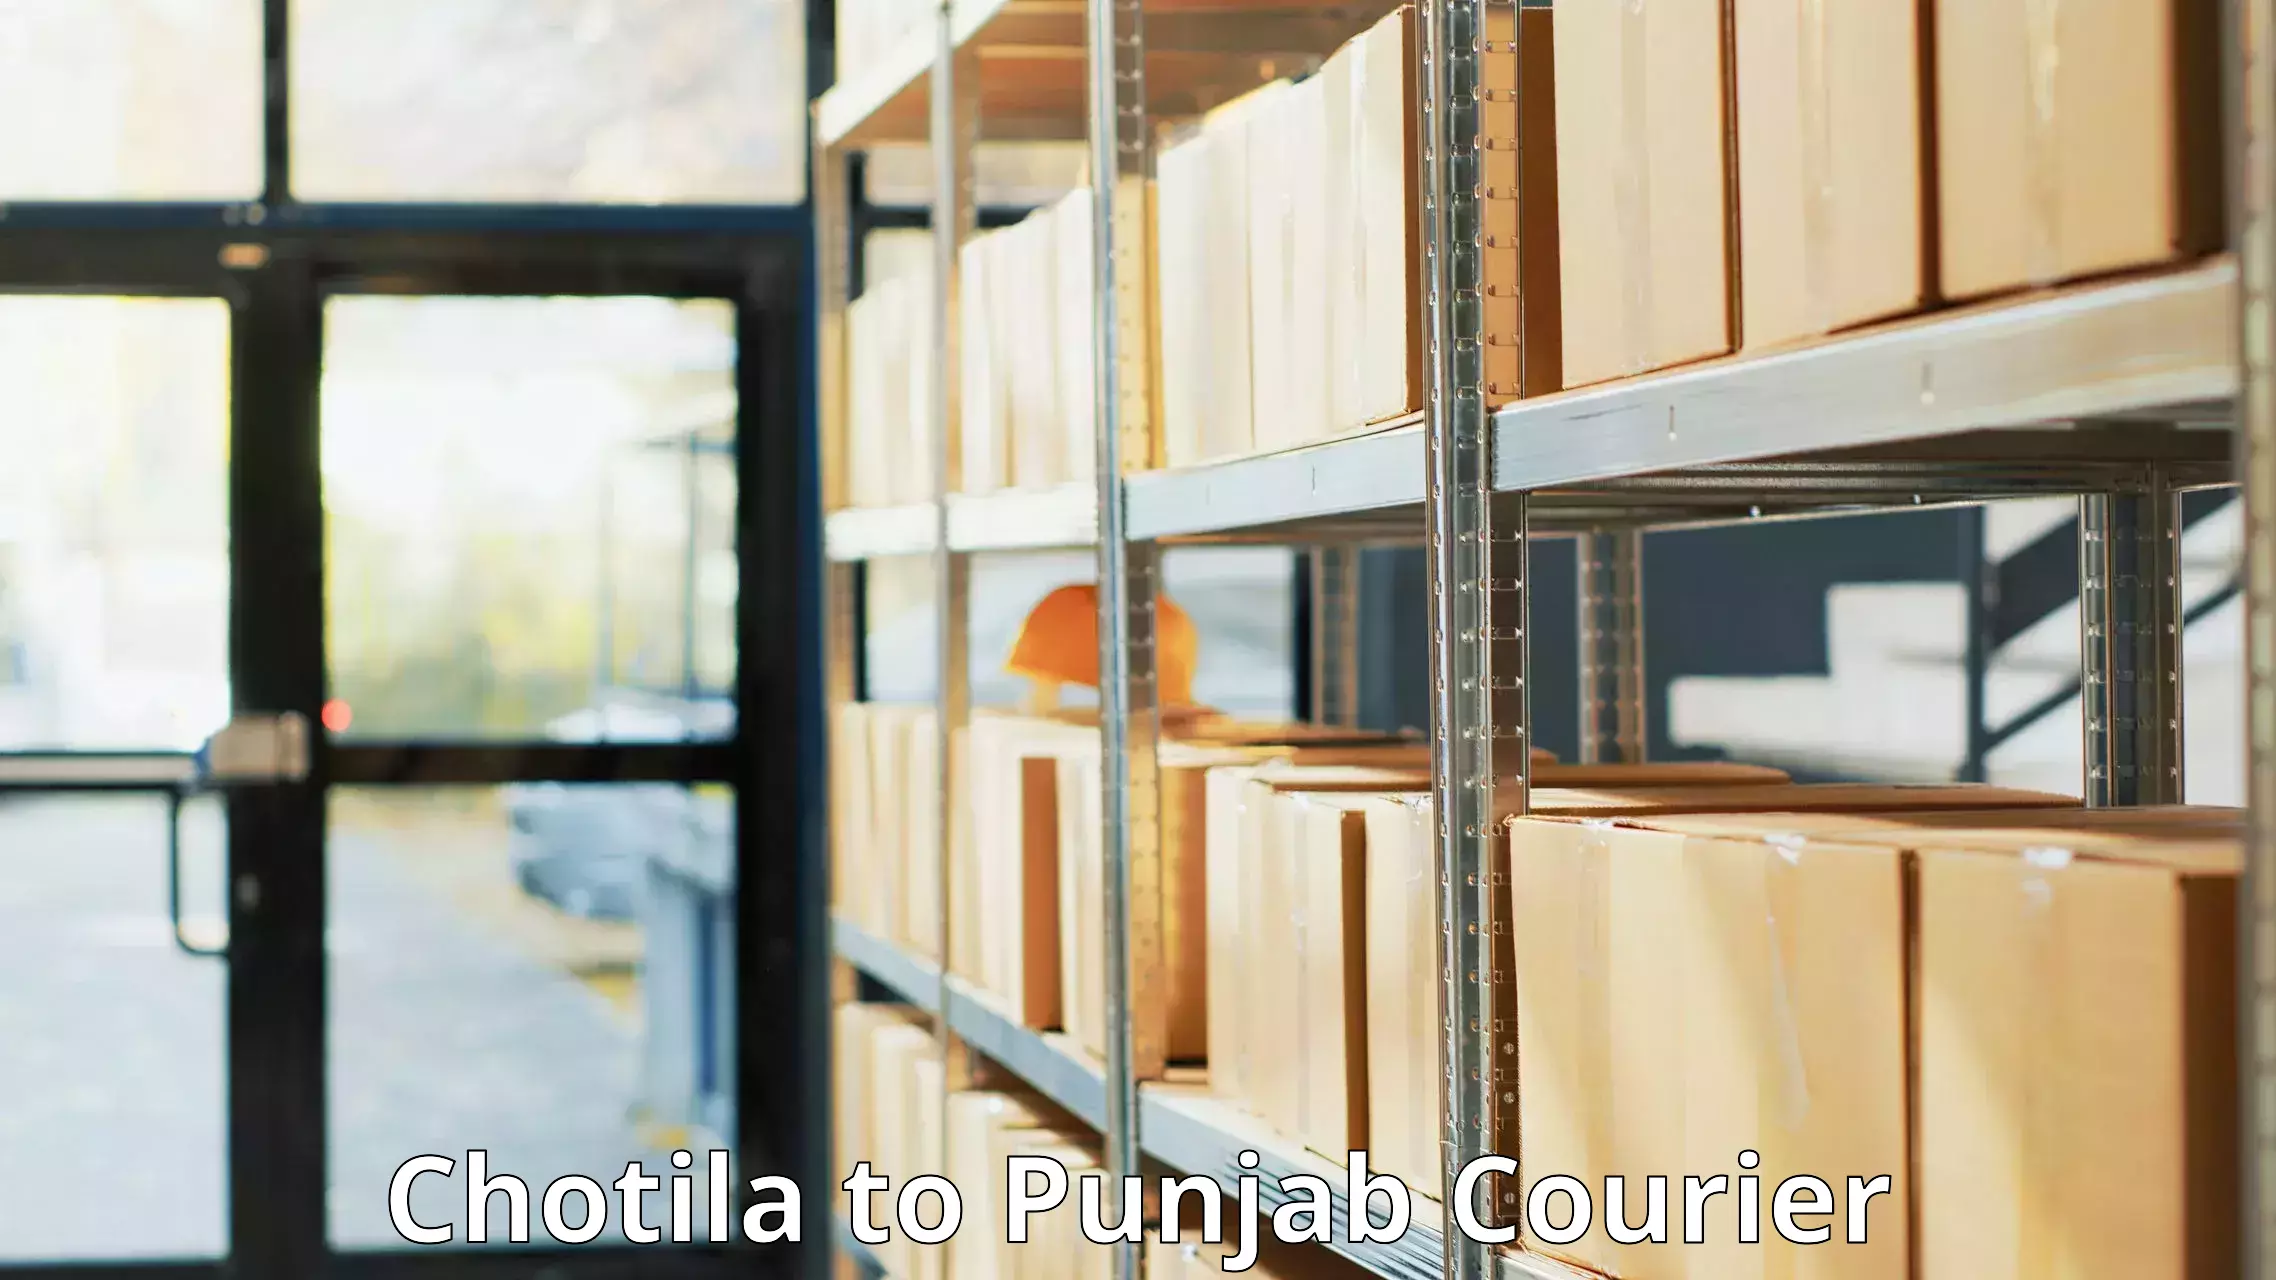 Reliable courier service in Chotila to Punjab